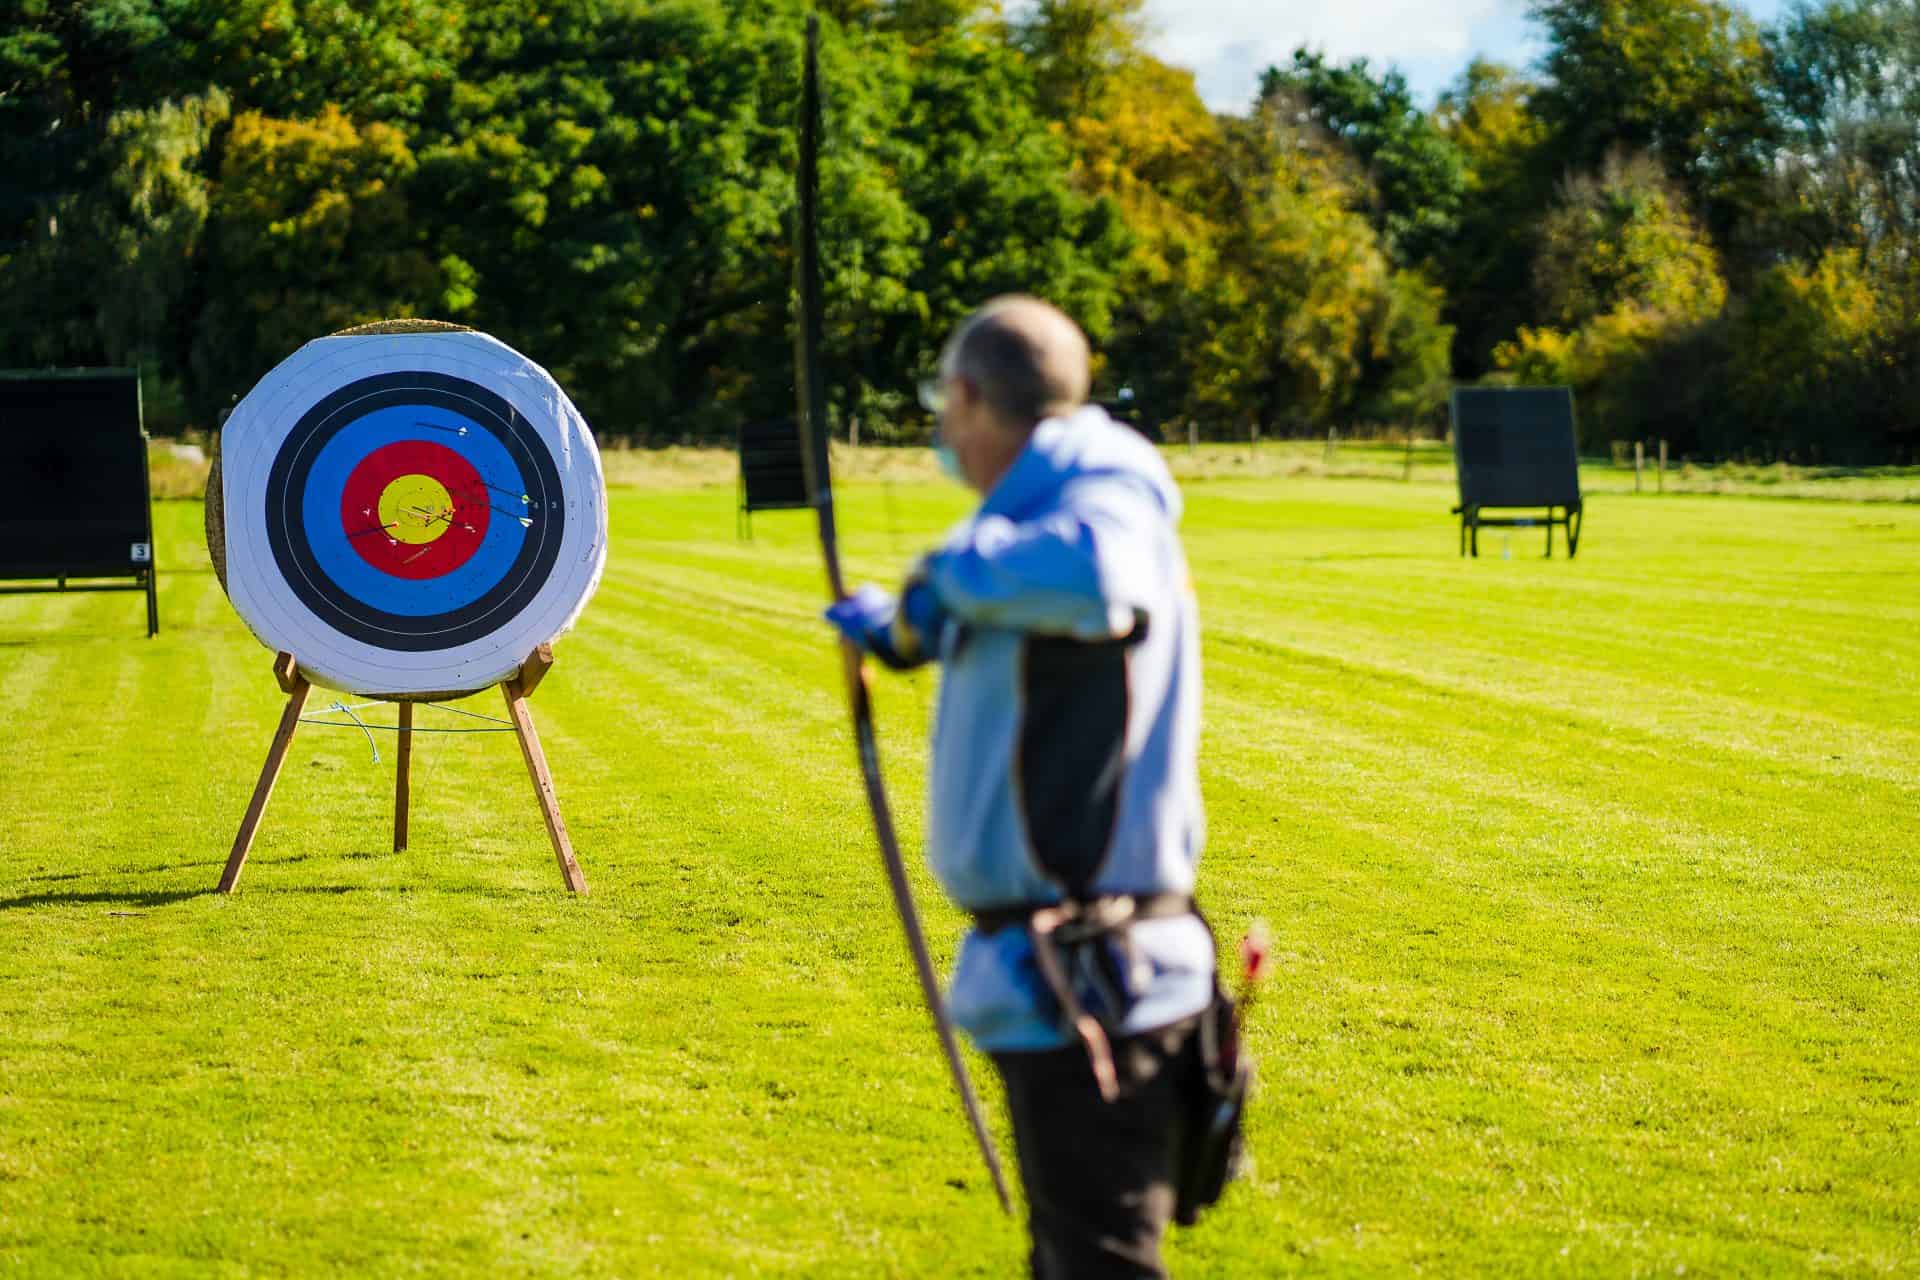 Book your place on the Archery GB winter webinar programme